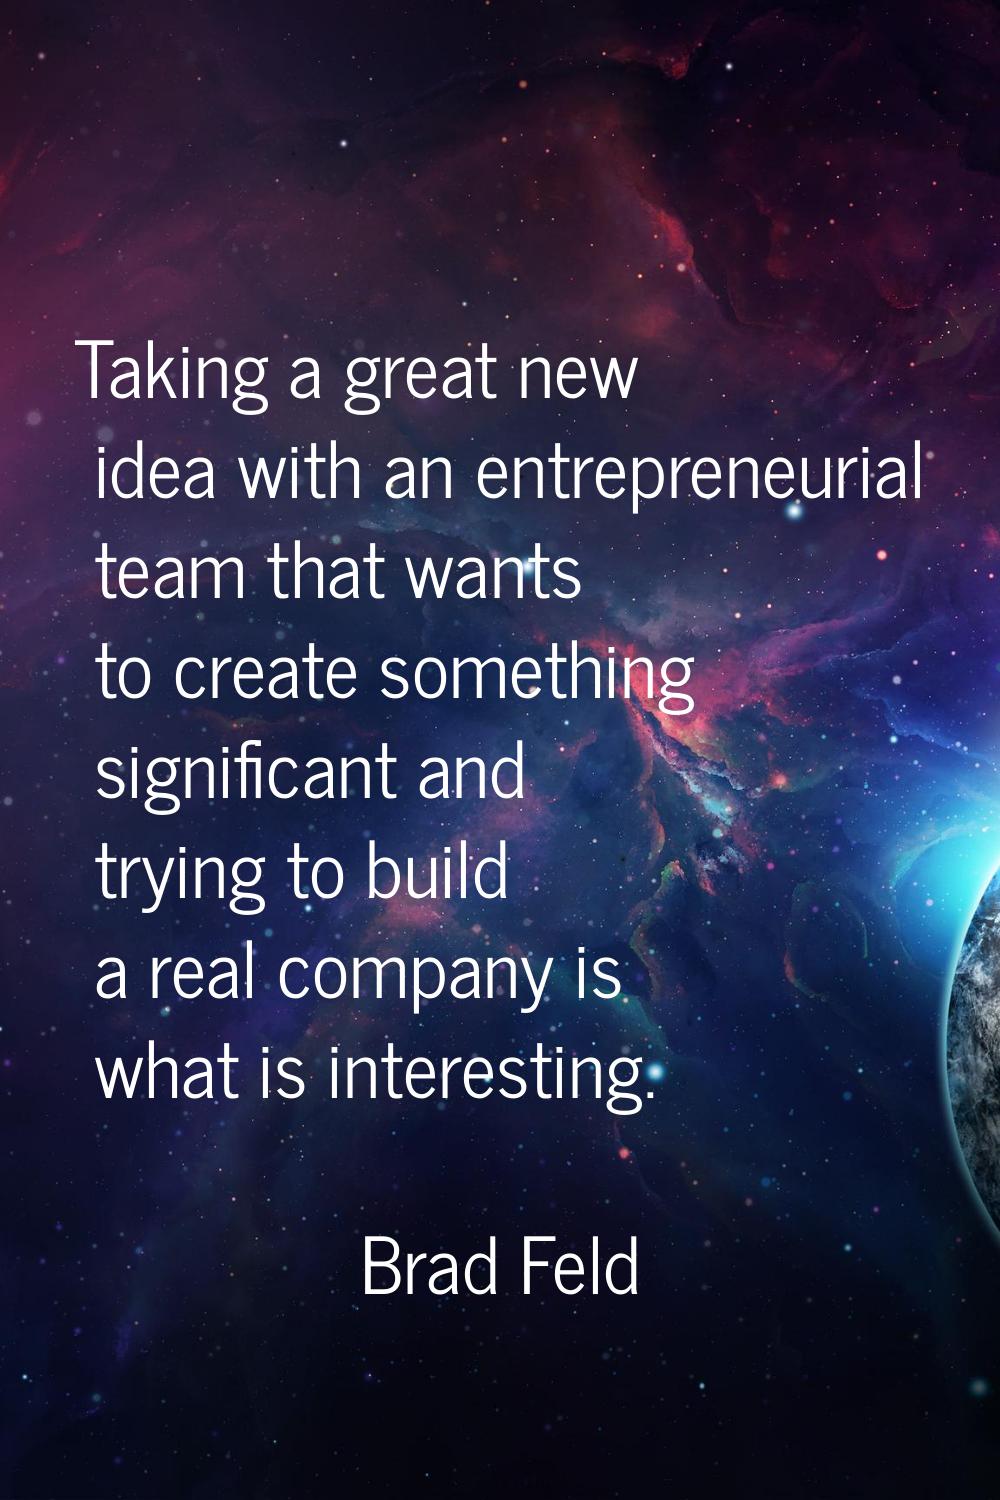 Taking a great new idea with an entrepreneurial team that wants to create something significant and